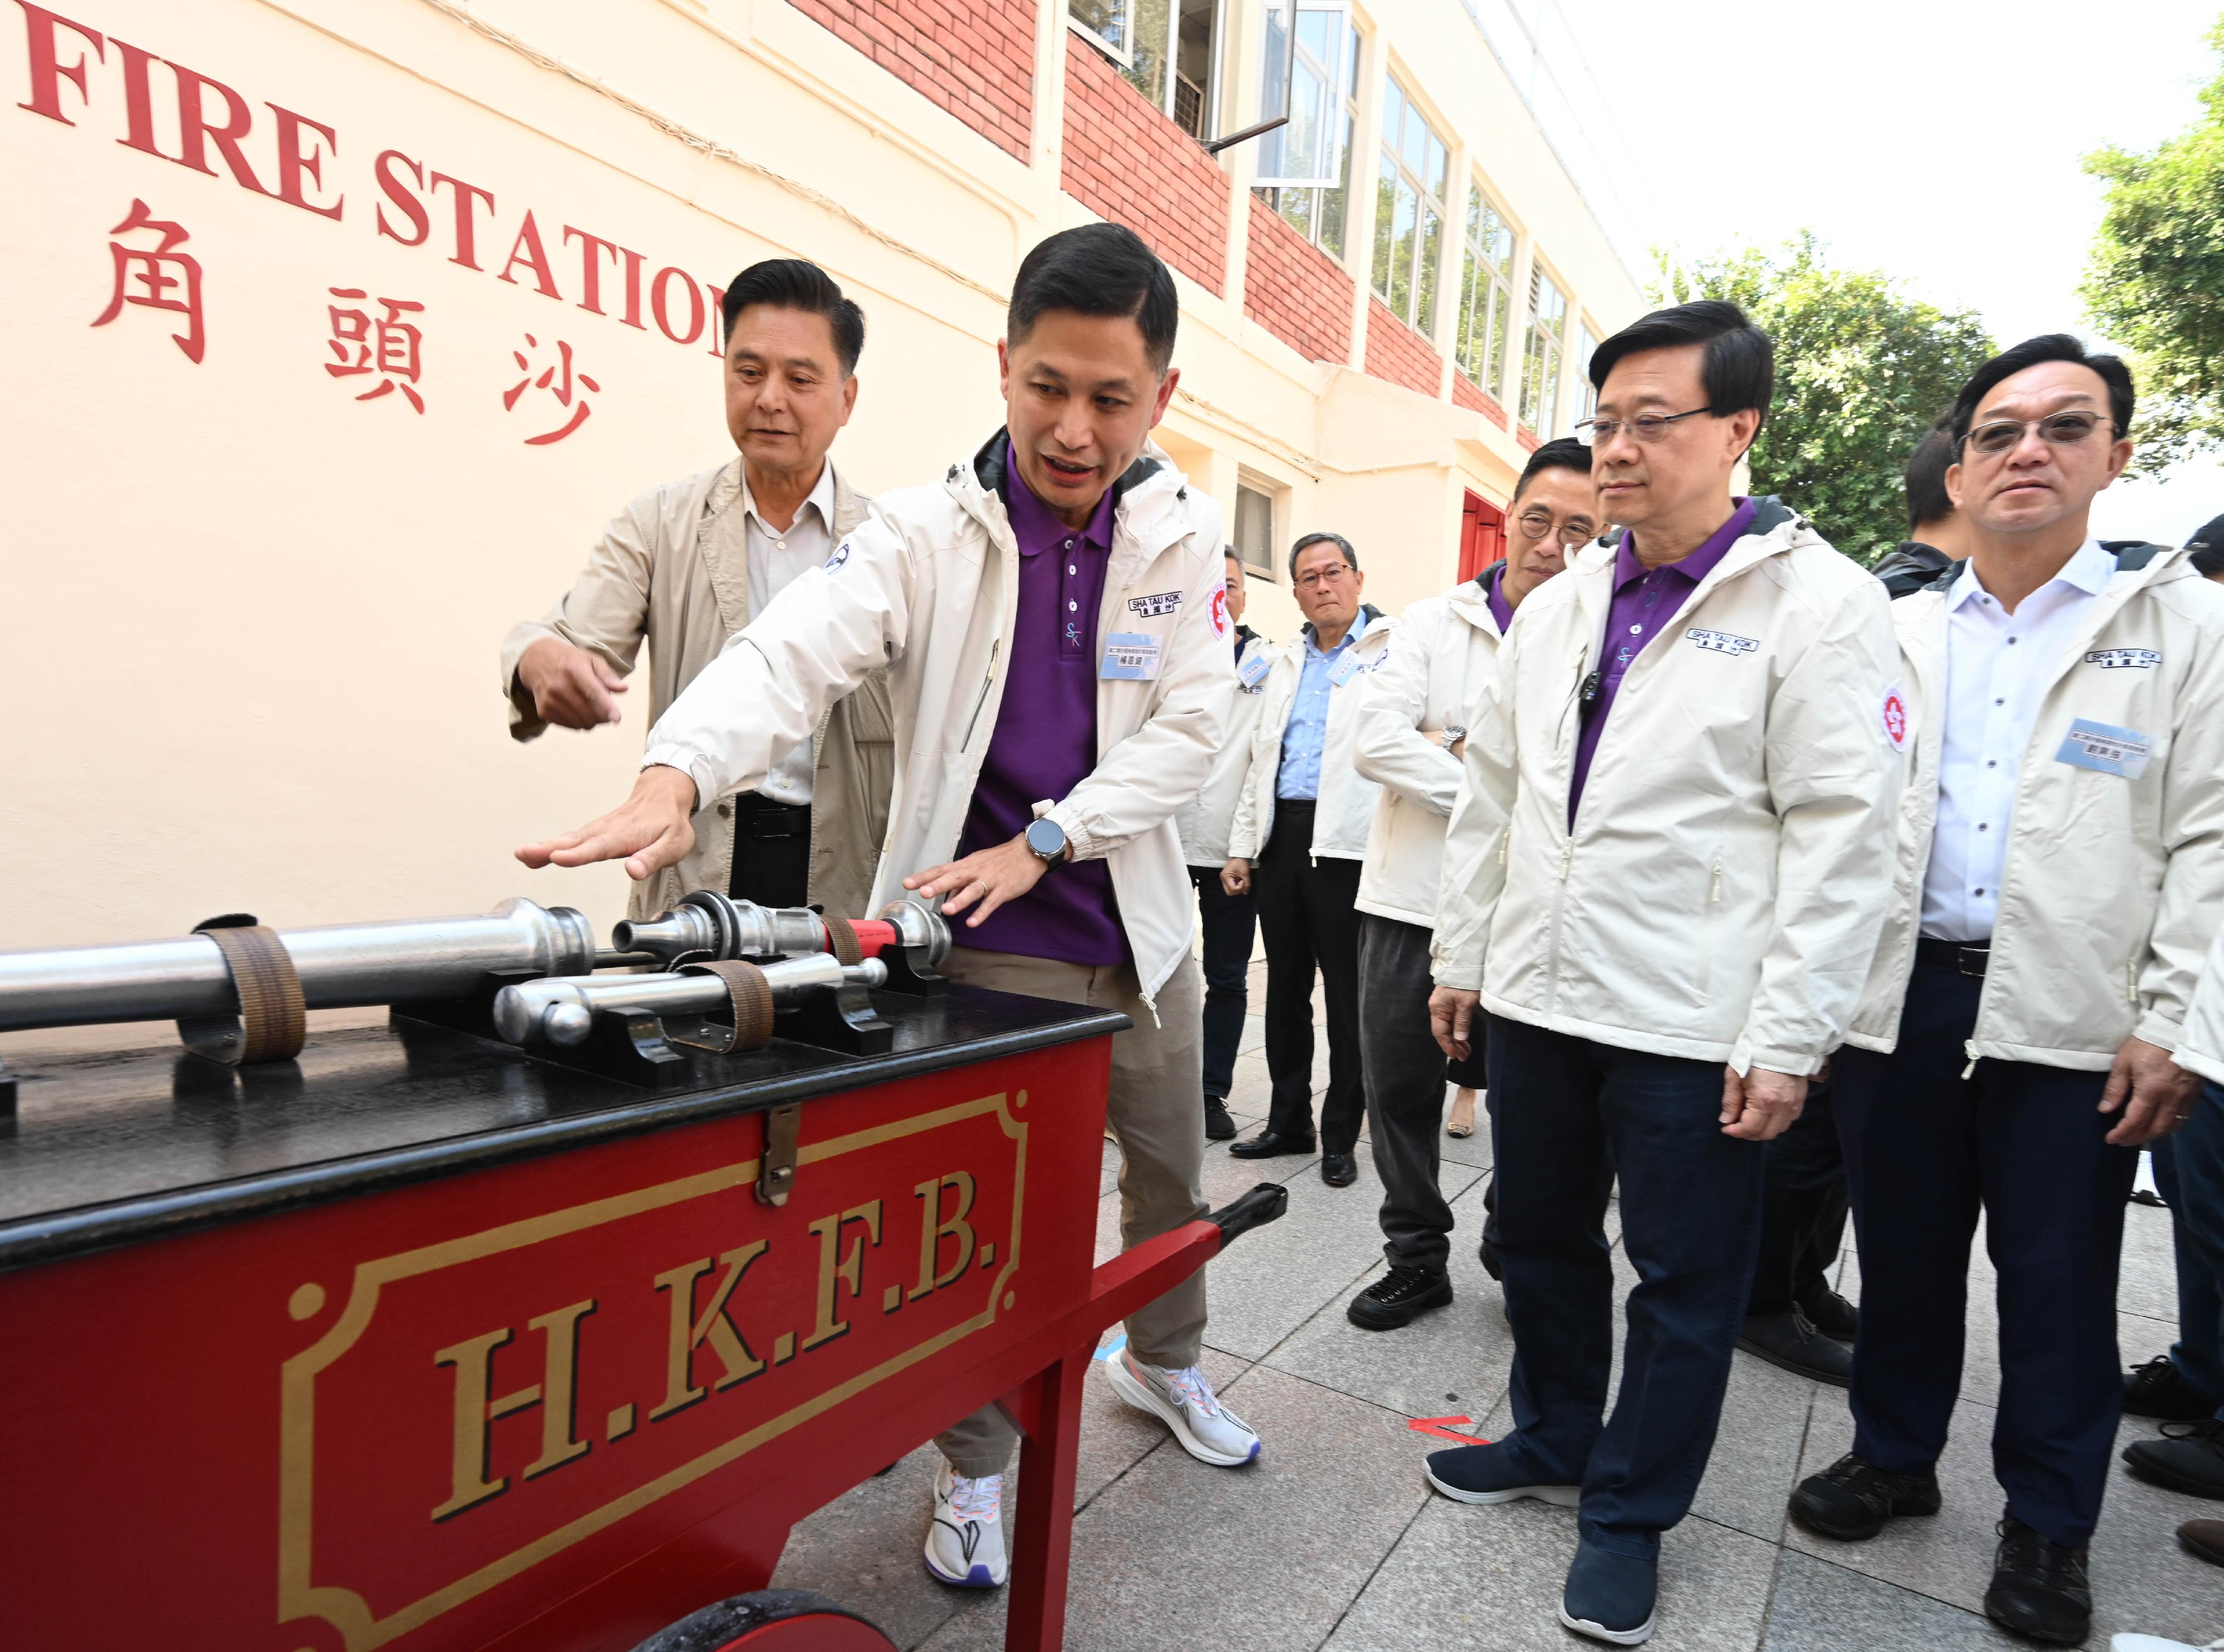 The Chief Executive, Mr John Lee, officiated at the Second Phase Opening-up of Sha Tau Kok Launching Ceremony today (January 6). Photo shows Mr Lee (second right) being briefed by the Director of Fire Services, Mr Andy Yeung (second left), on a century-old fire-fighting hand cart at the old Sha Tau Kok Fire Station.